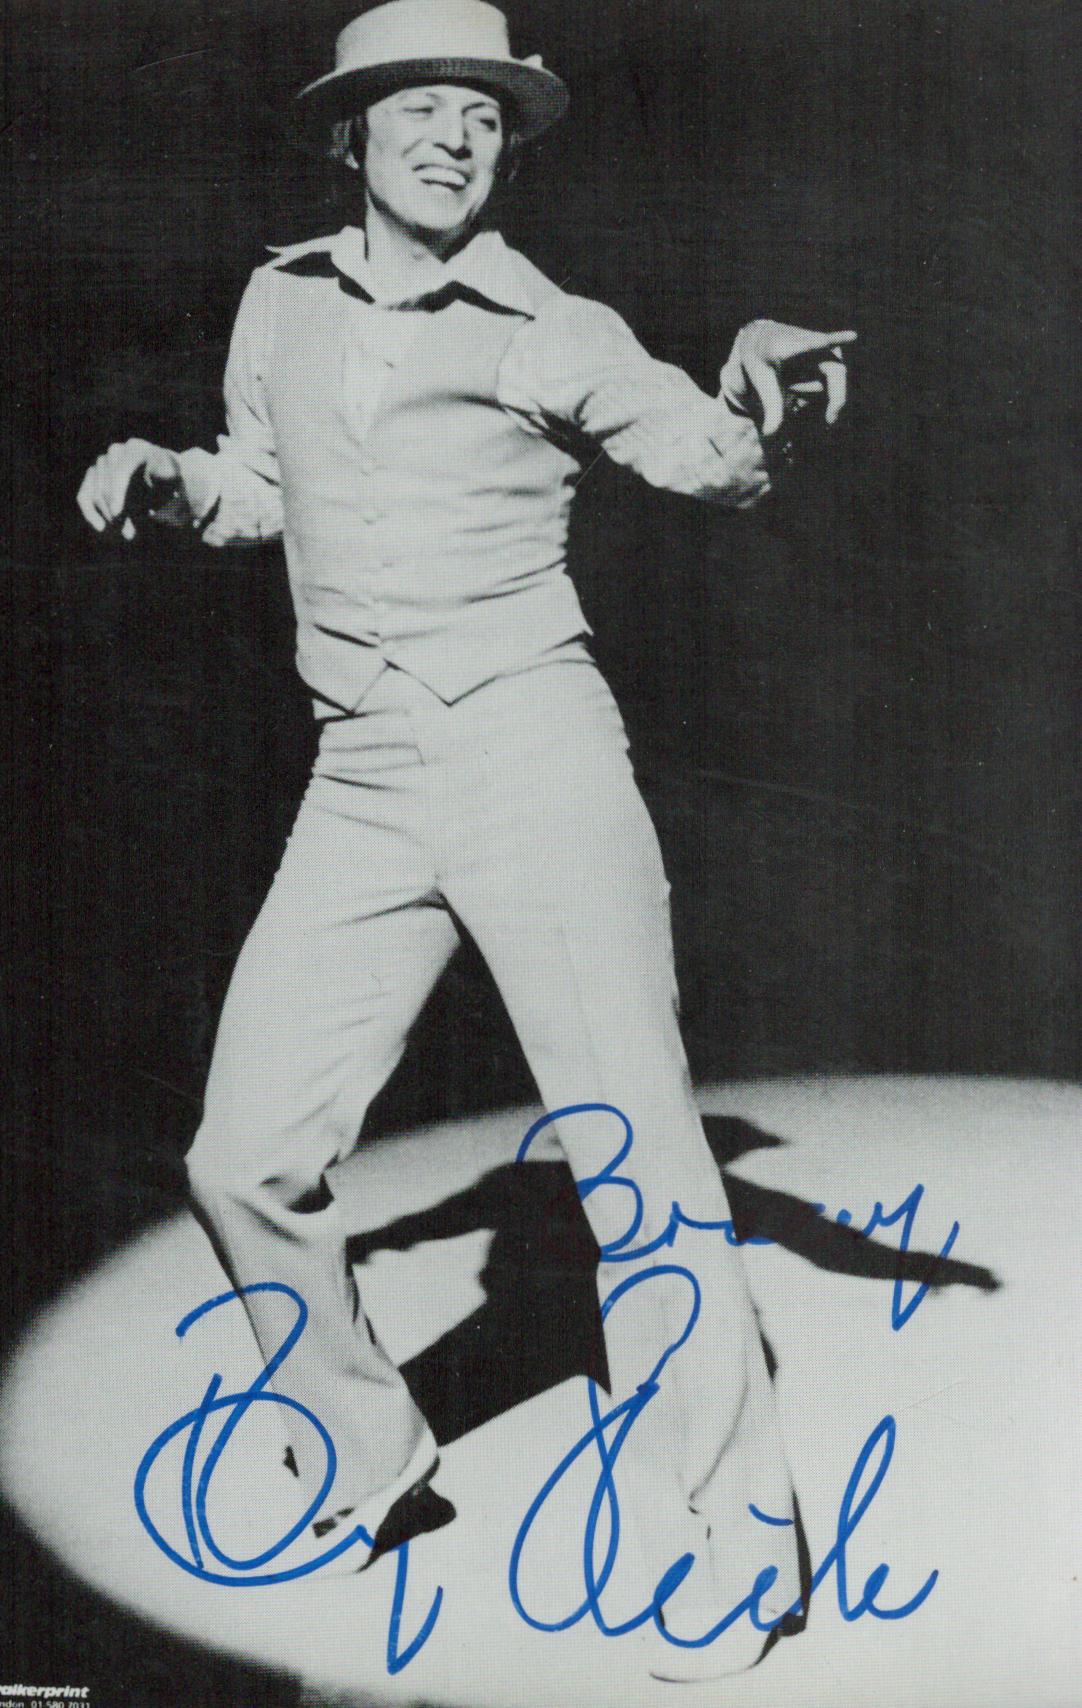 Tommy Steele OBE signed black & white photo 6x4 Inch. Dedicated. Known professionally as Tommy